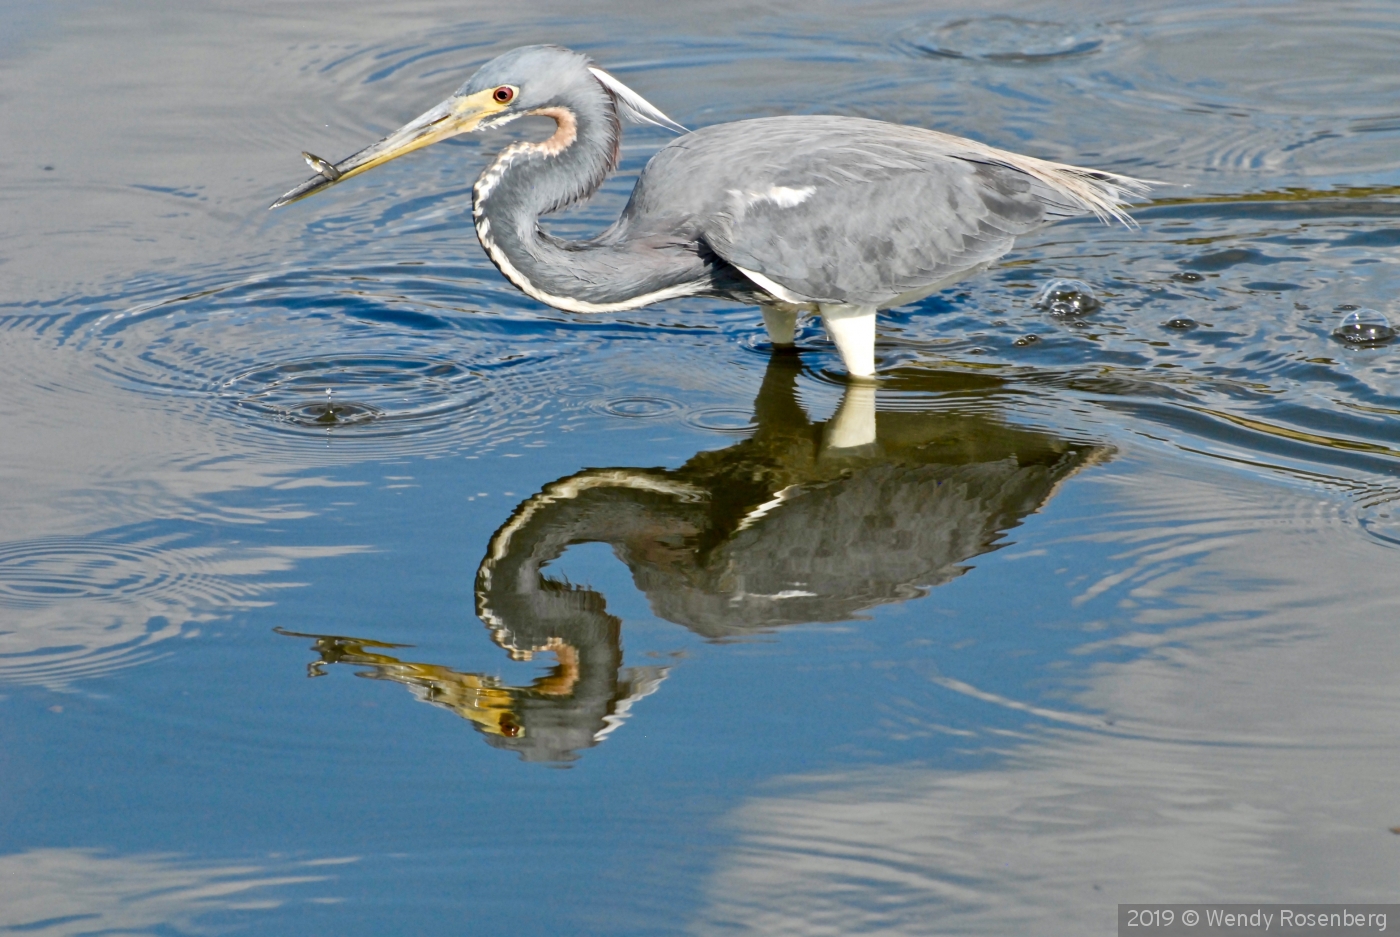 Heron snacking on a small fish by Wendy Rosenberg